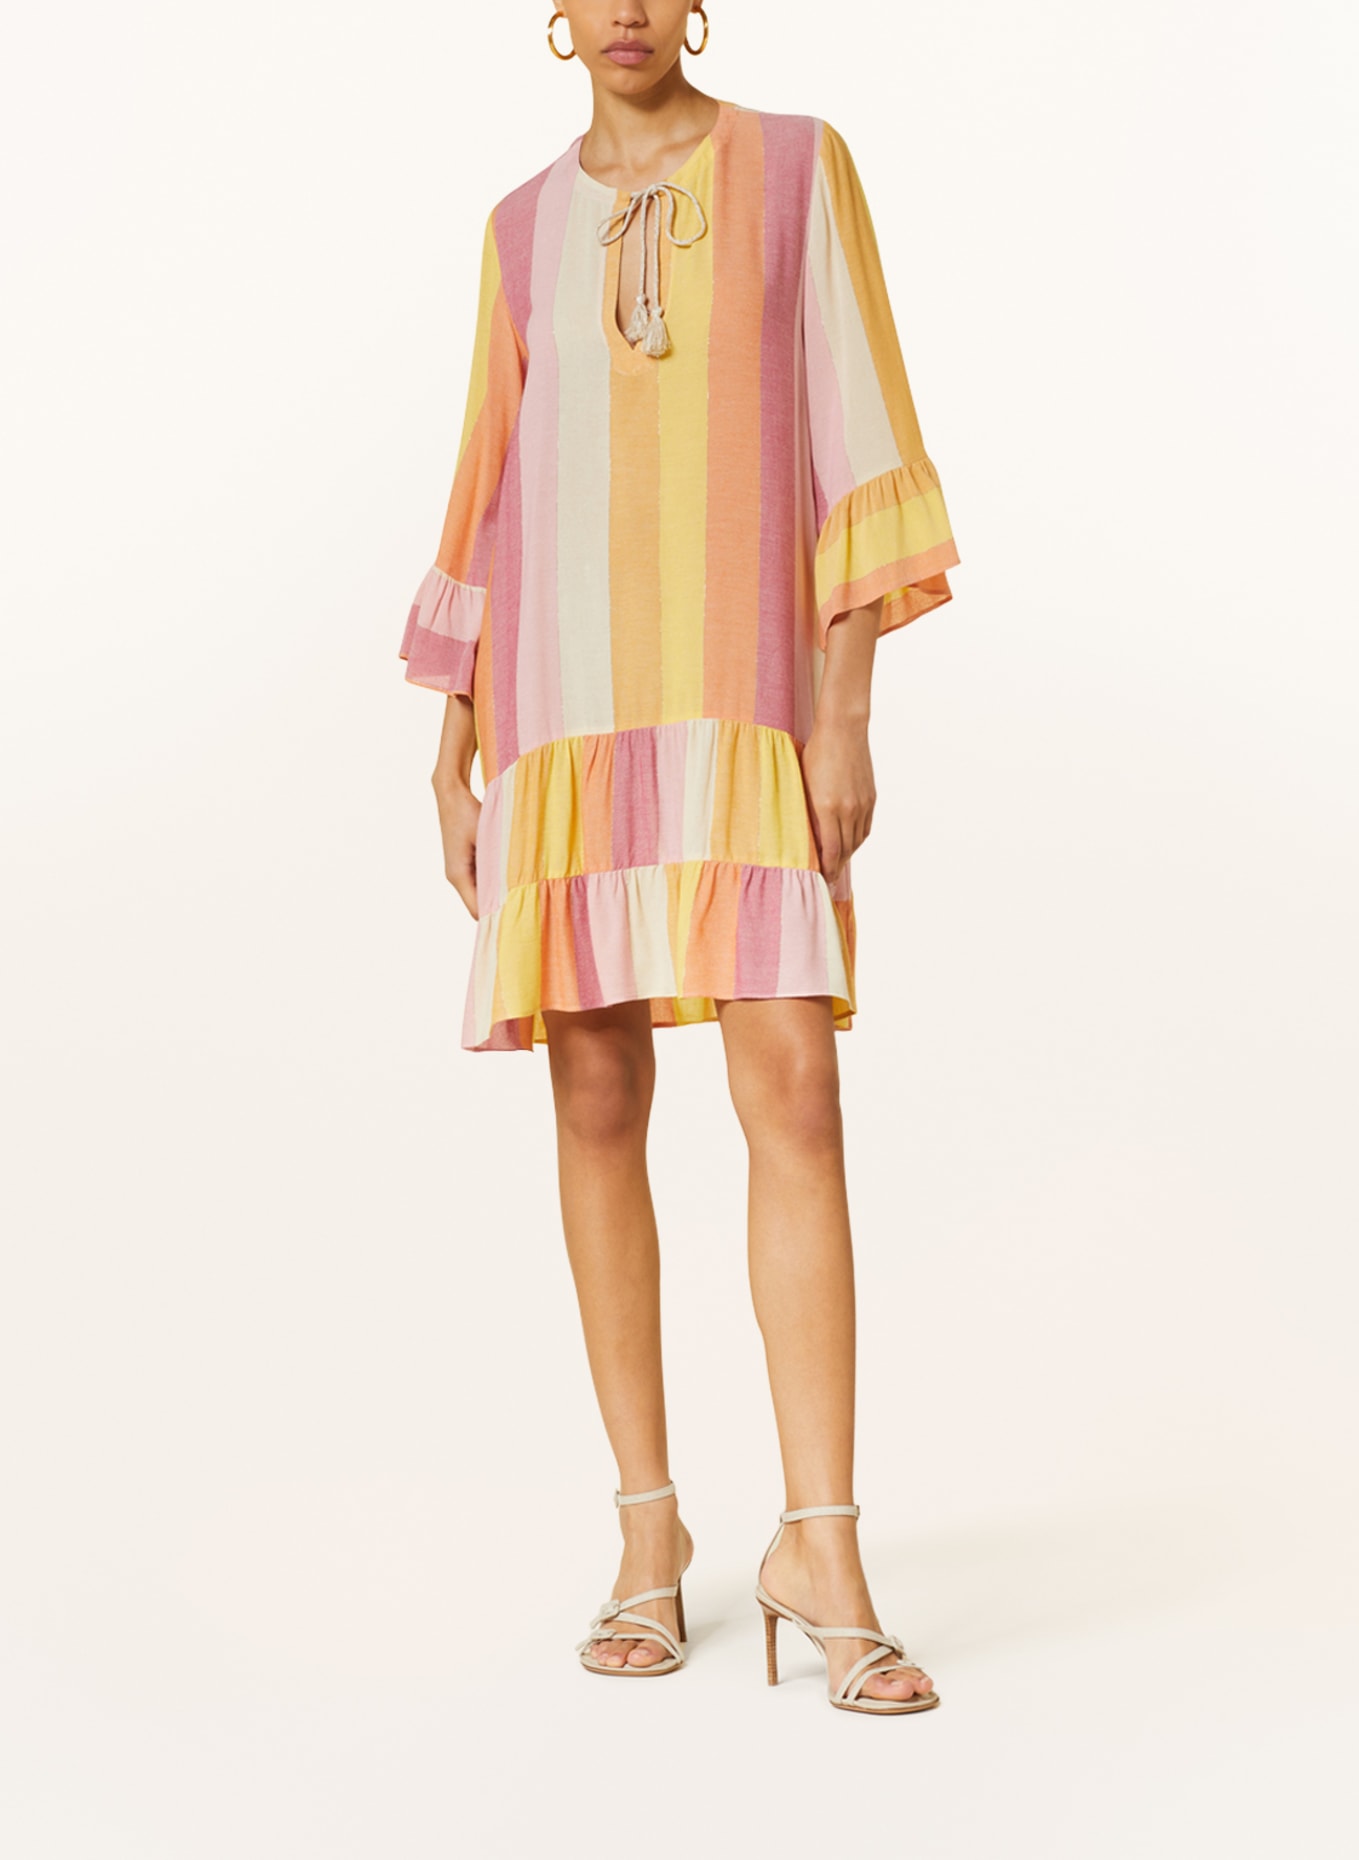 VALÉRIE KHALFON Dress MONTANA with 3/4 sleeve and glitter thread, Color: PINK/ LIGHT ORANGE/ YELLOW (Image 2)